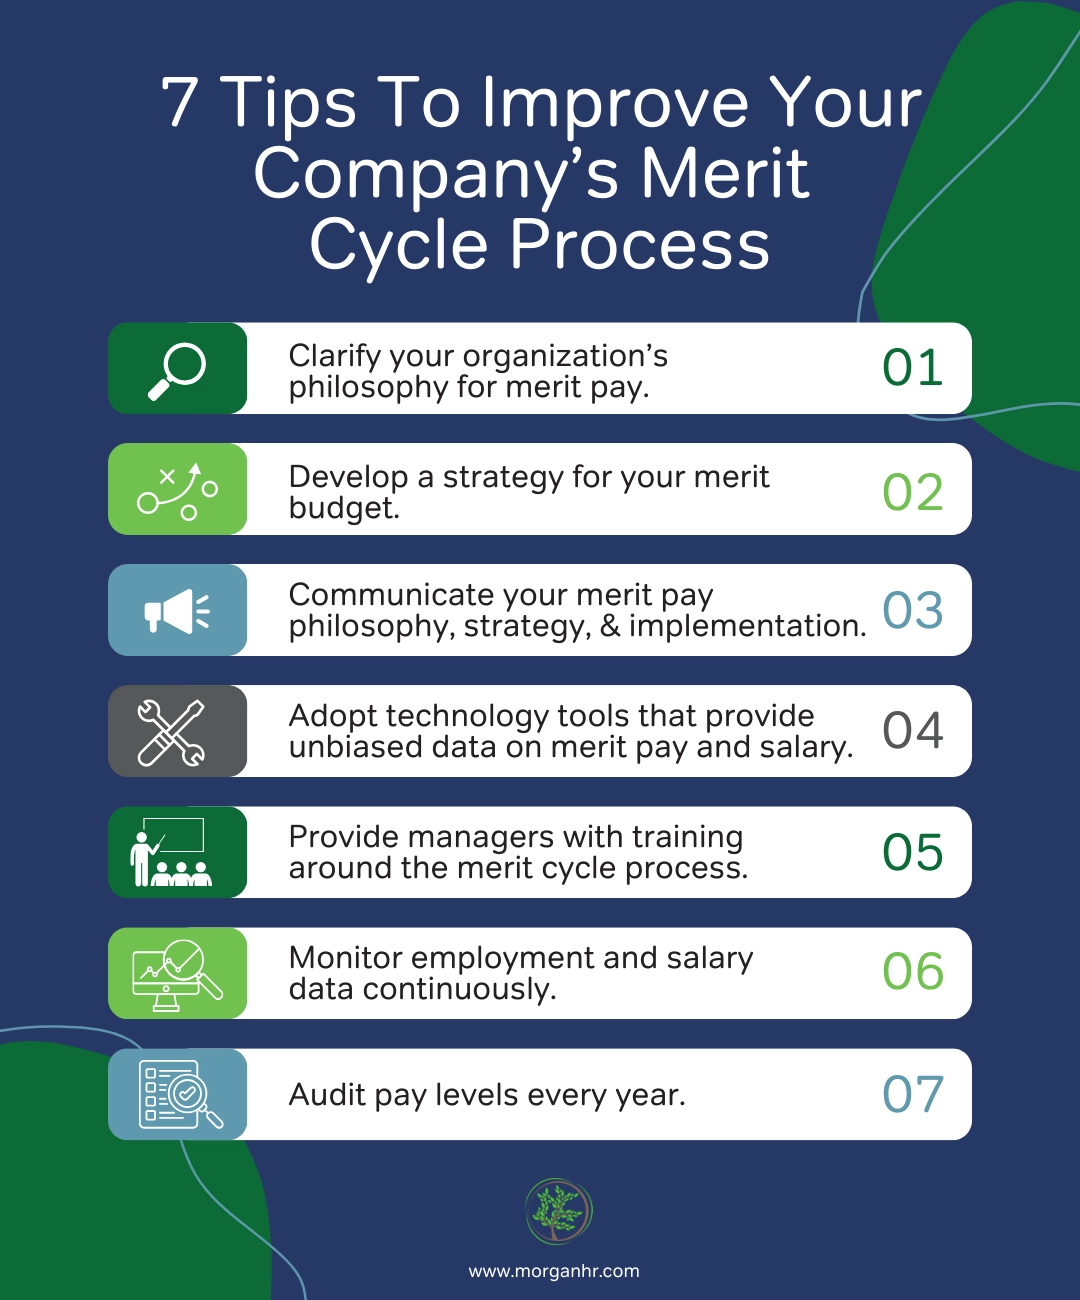 7 Tips To Improve Your Company’s Merit Cycle Process